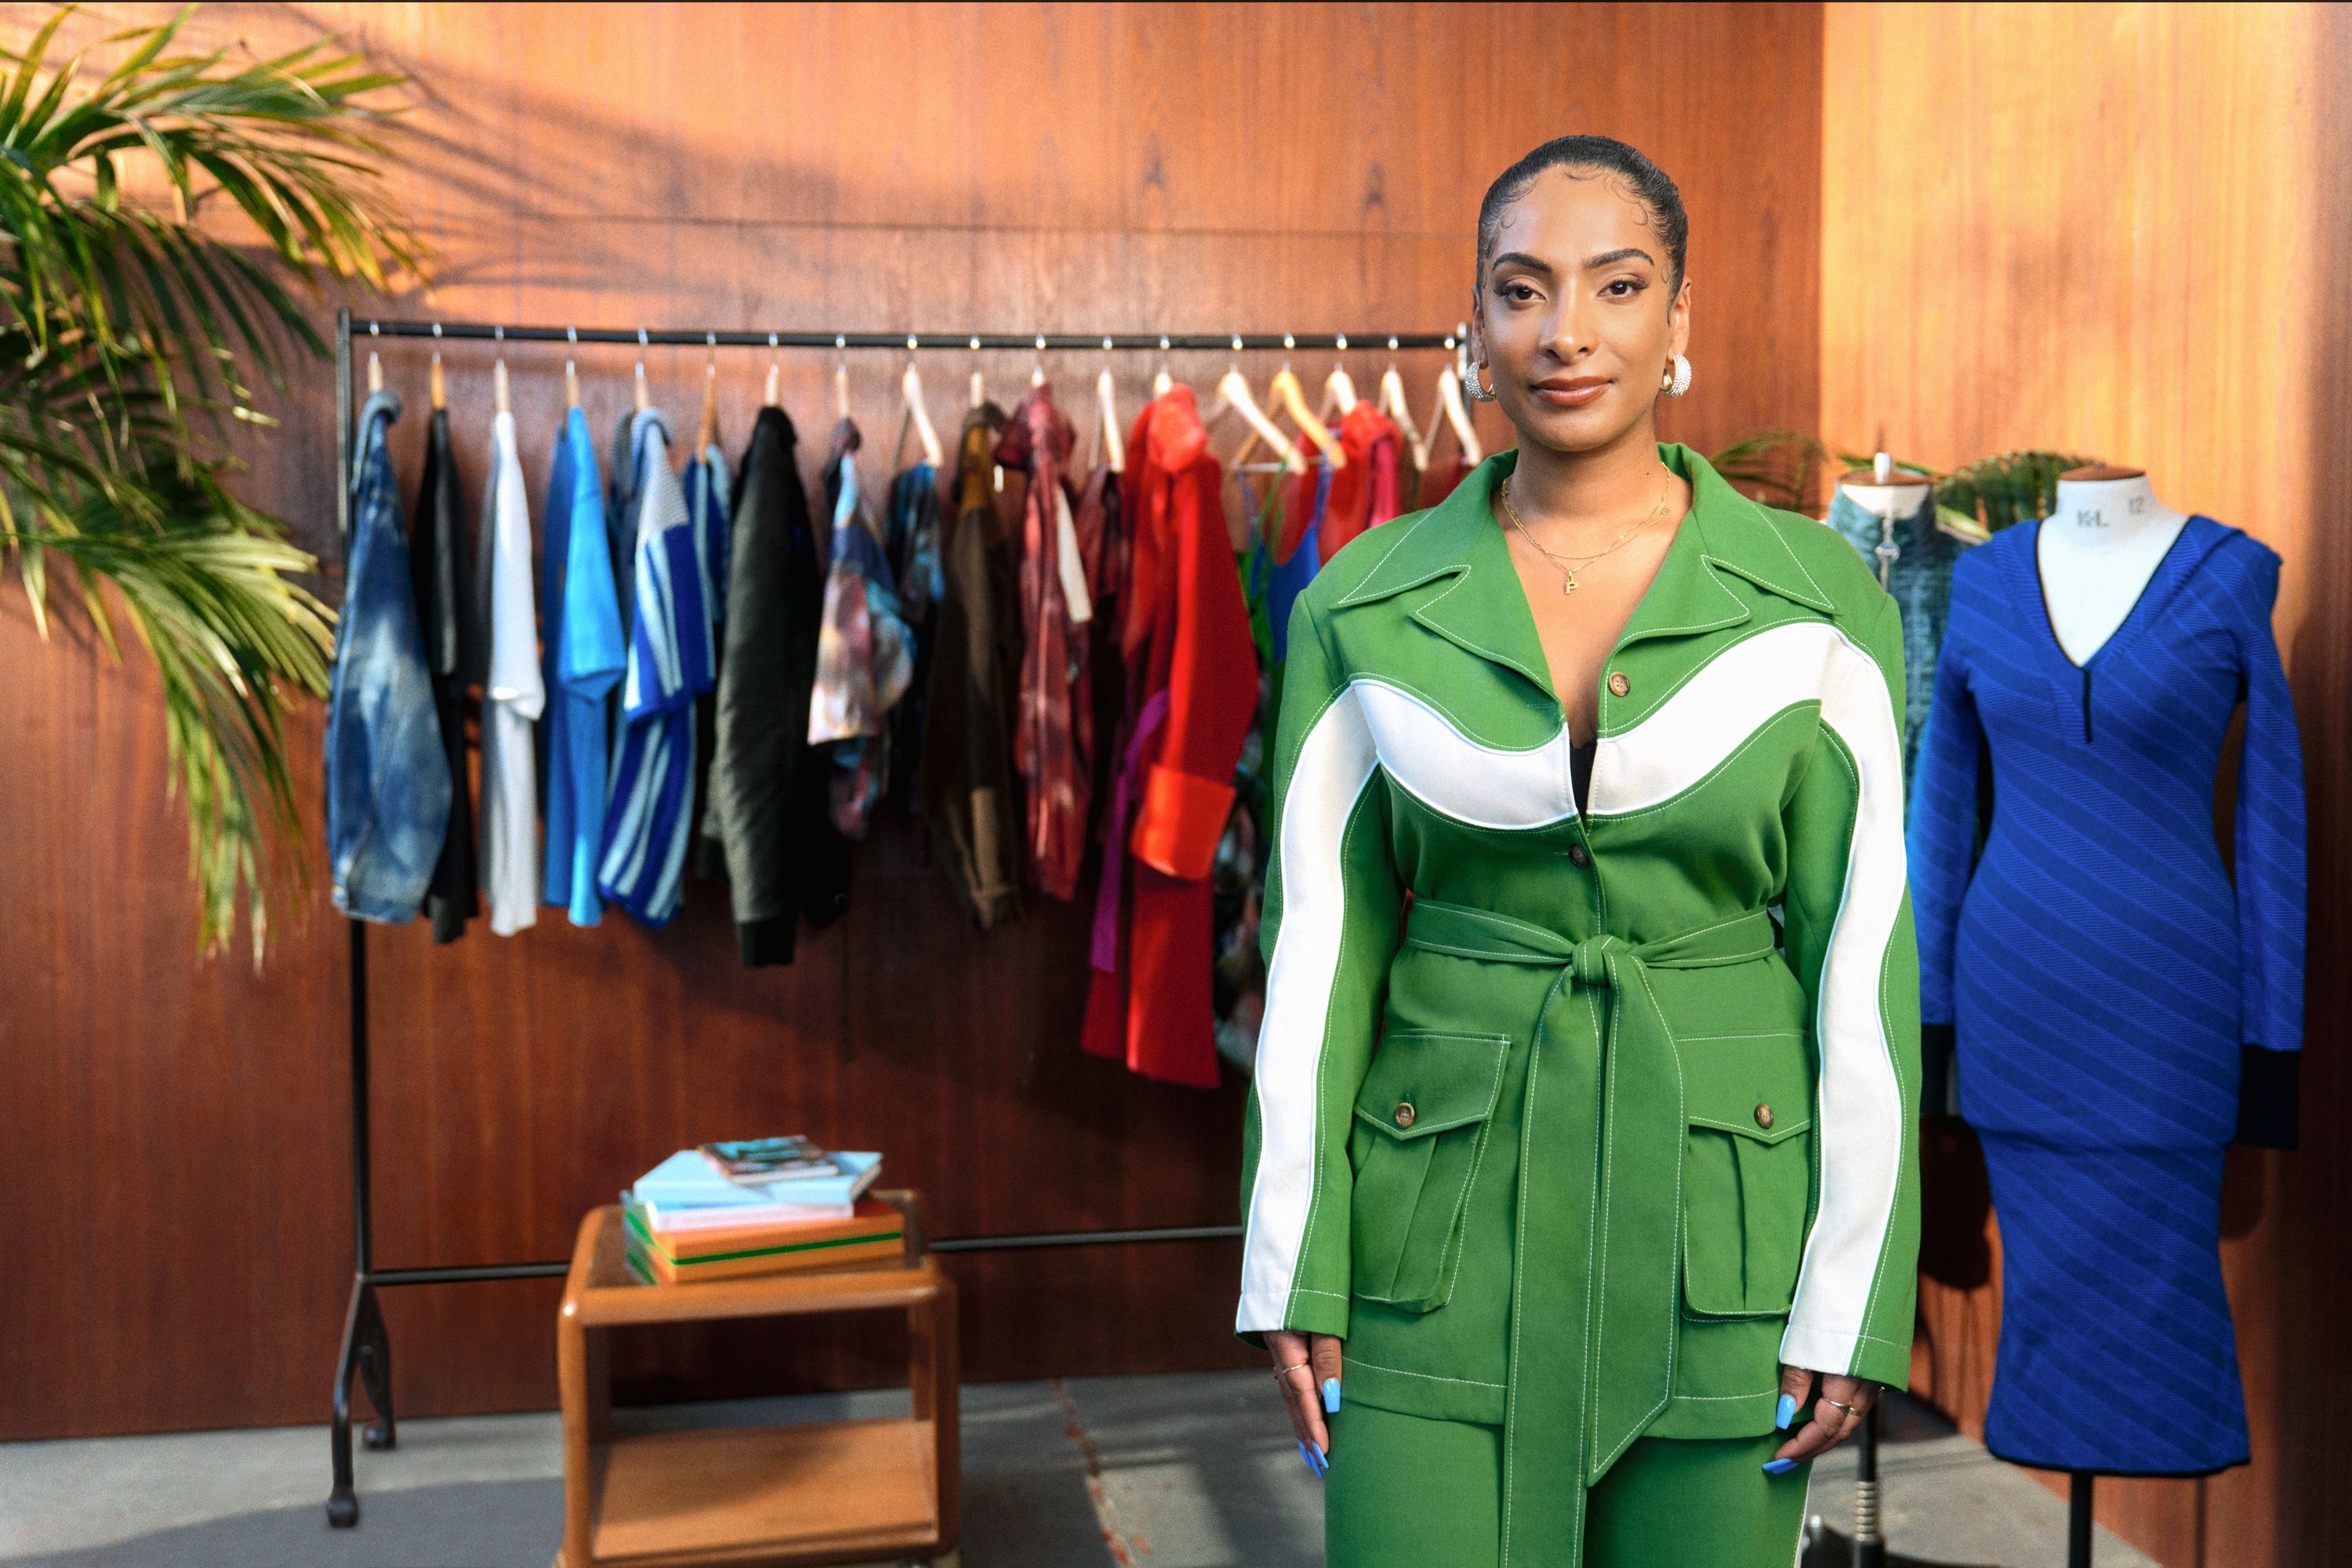 Priya Ahluwalia: I'm so much more than just a 'sustainable designer